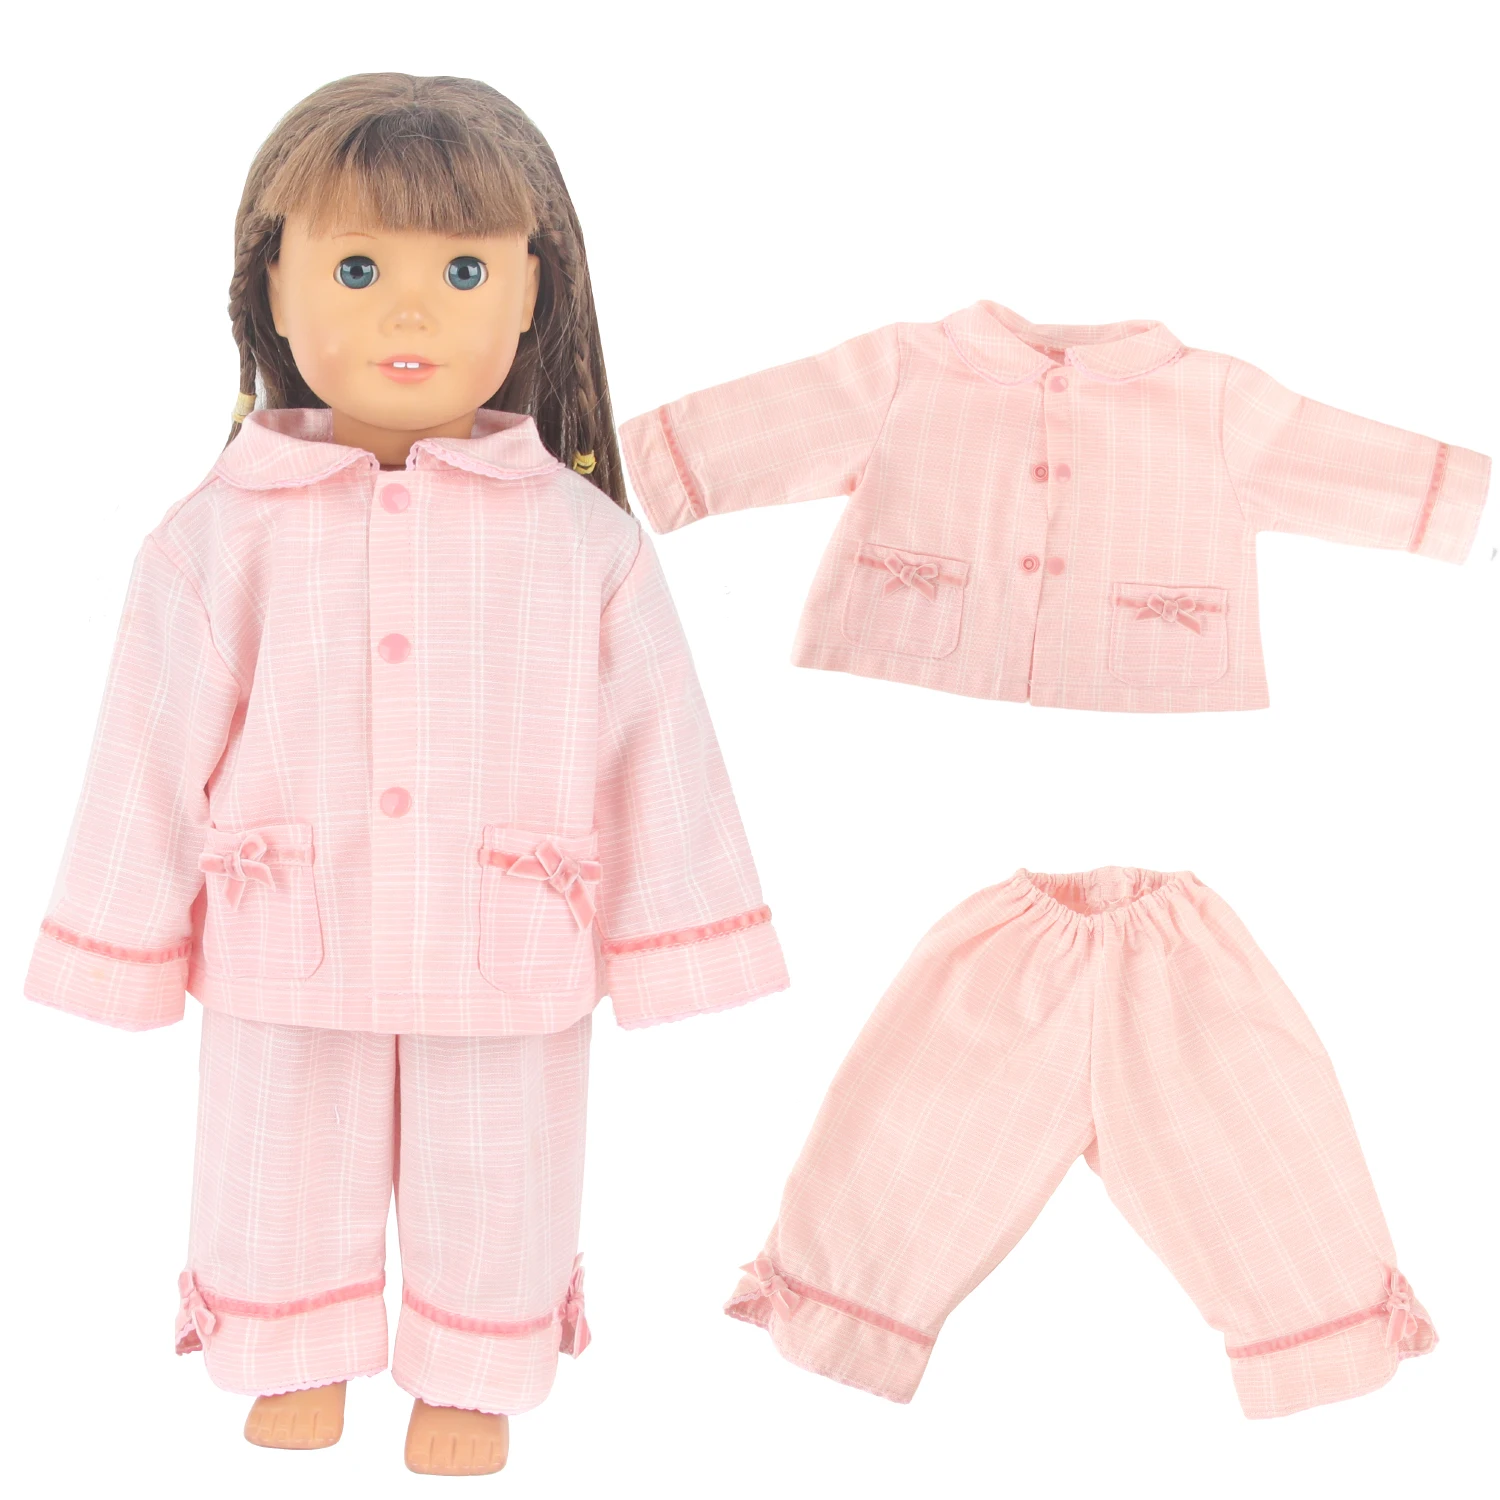 New Pink Bow Knot Doll Clothes Set For 18 Inches American&43cm Baby New Born Dolls,Mini Casual Wear For OG Girl Dolls Toy